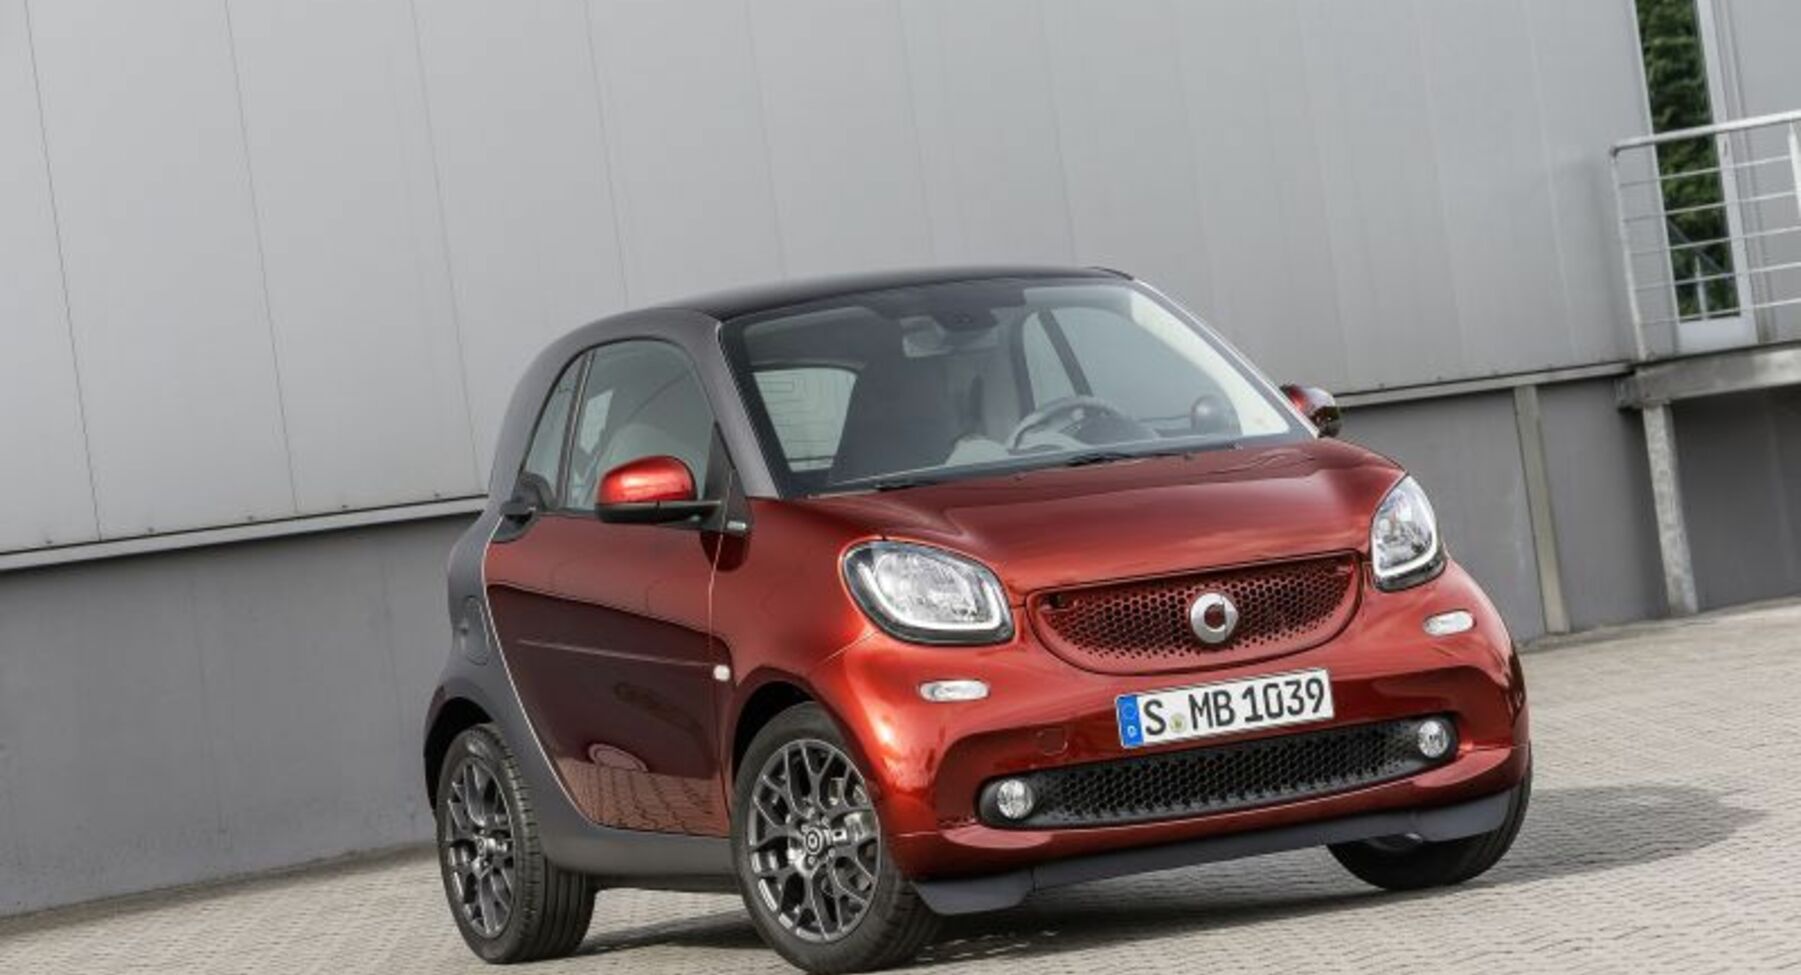 Smart Fortwo III coupe (C453) 17.6 kWh (82 Hp) electric drive 2017, 2018, 2019 